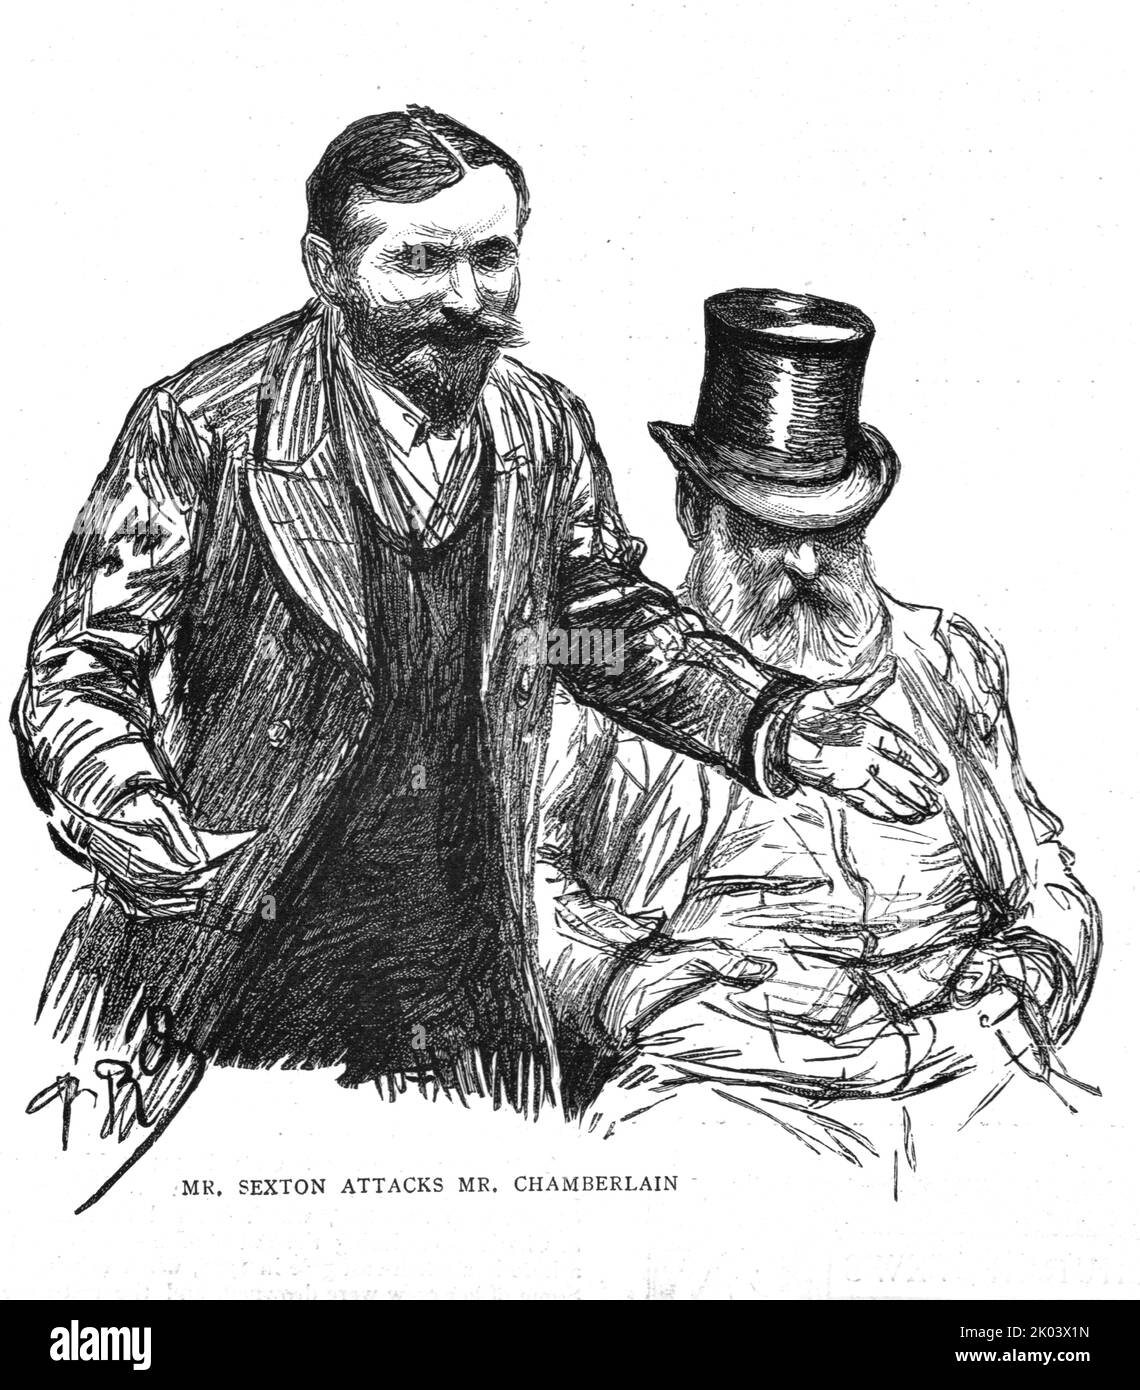 'The Home Rule debate in the House of Commons, Mr Sexton attacks Mr Chamberlain', 1886. From &quot;The Graphic. An Illustrated Weekly Newspaper Volume 33. January to June, 1886&quot; Stock Photo